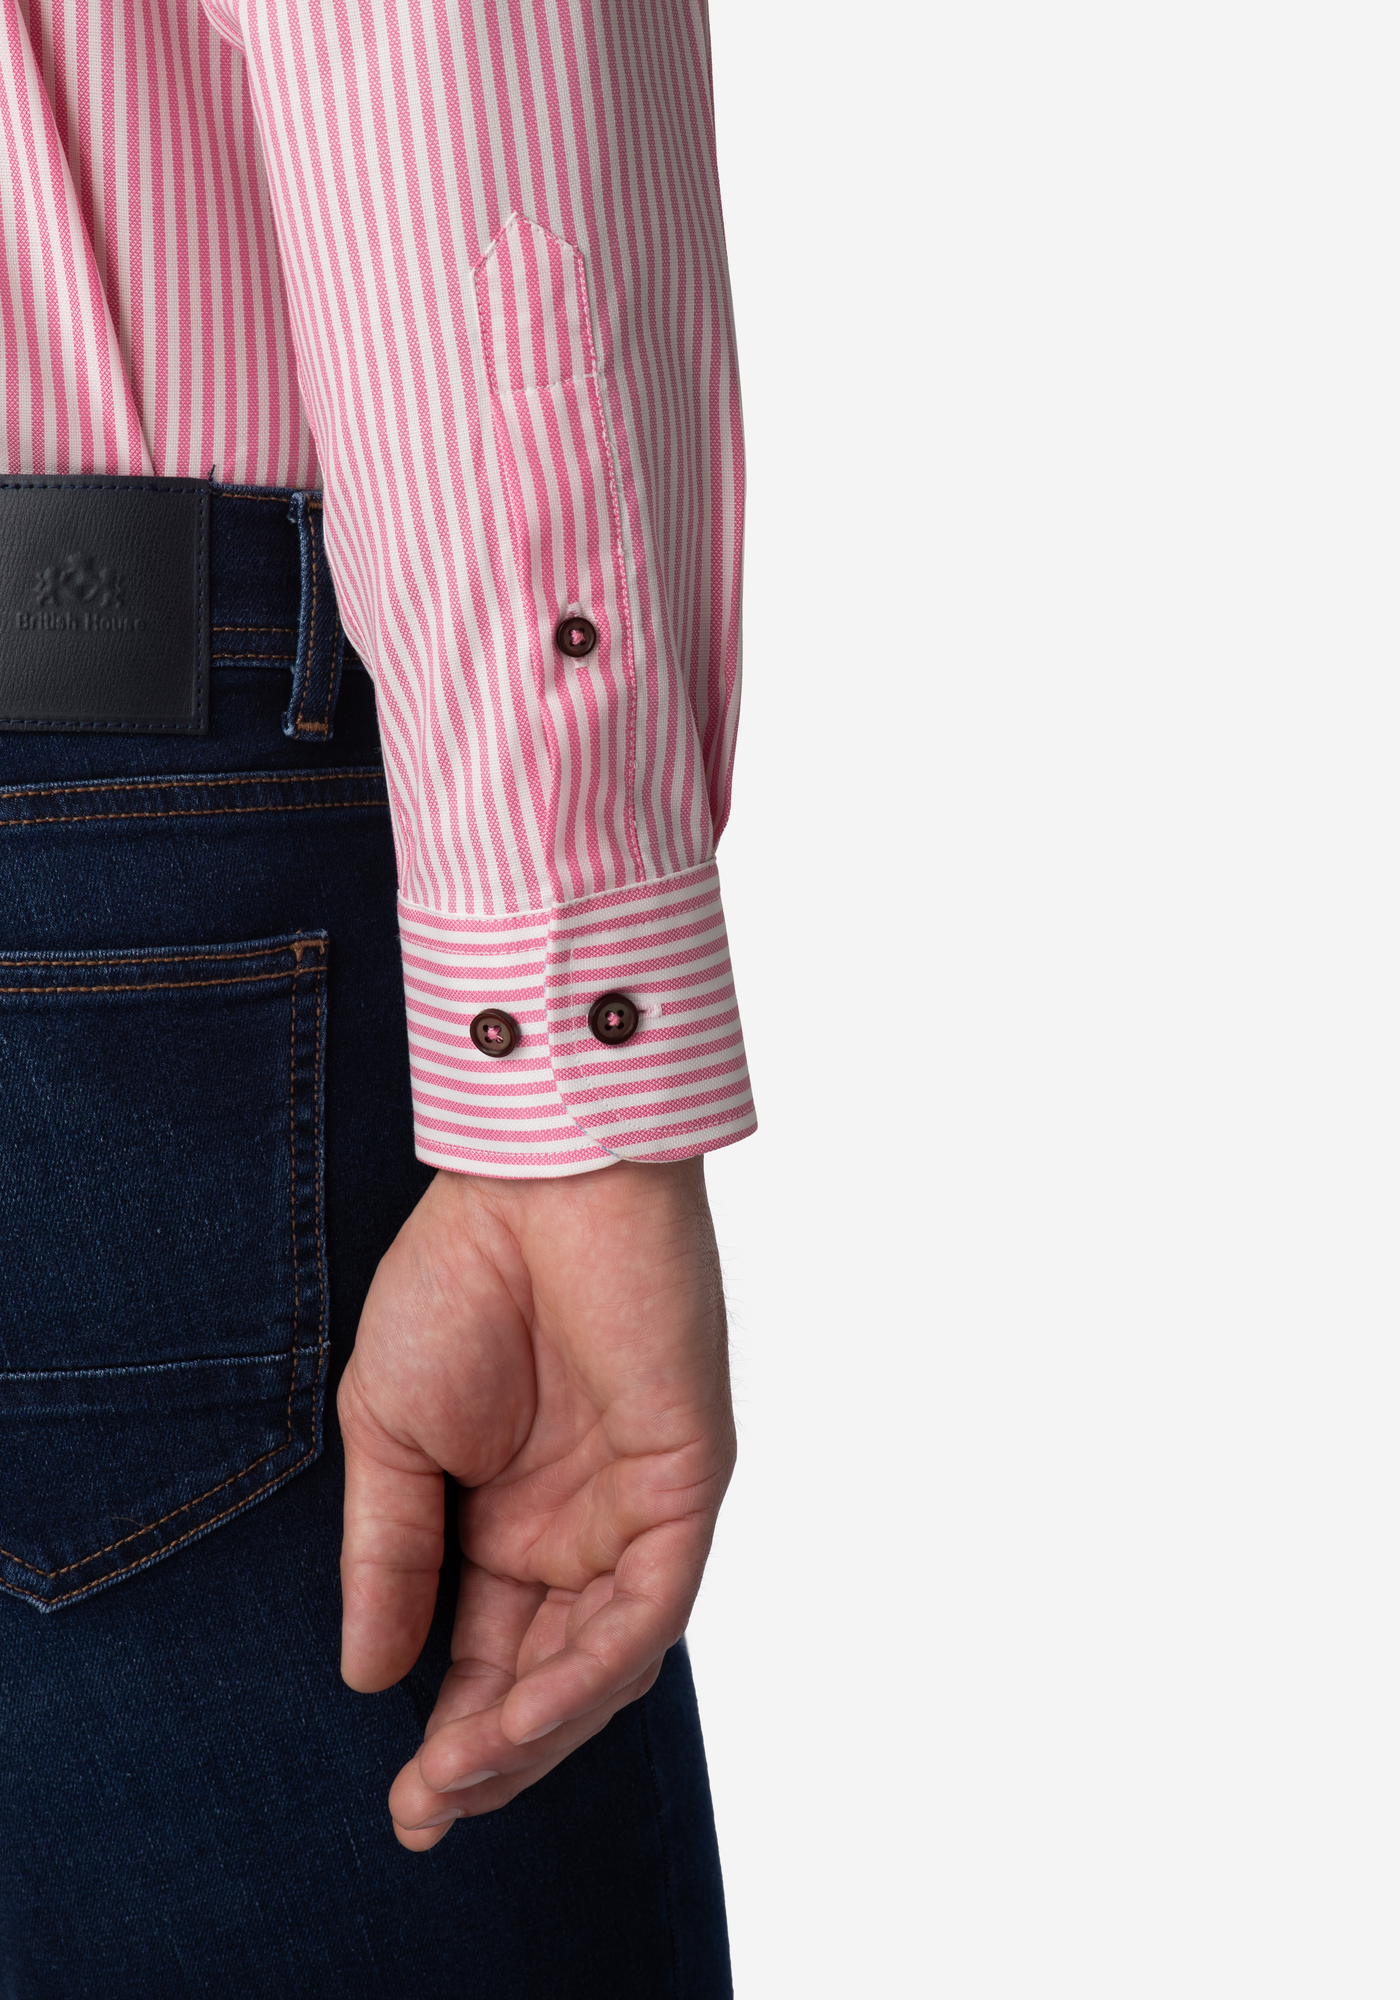 French Pink Stripe Two-Ply Oxford Shirt